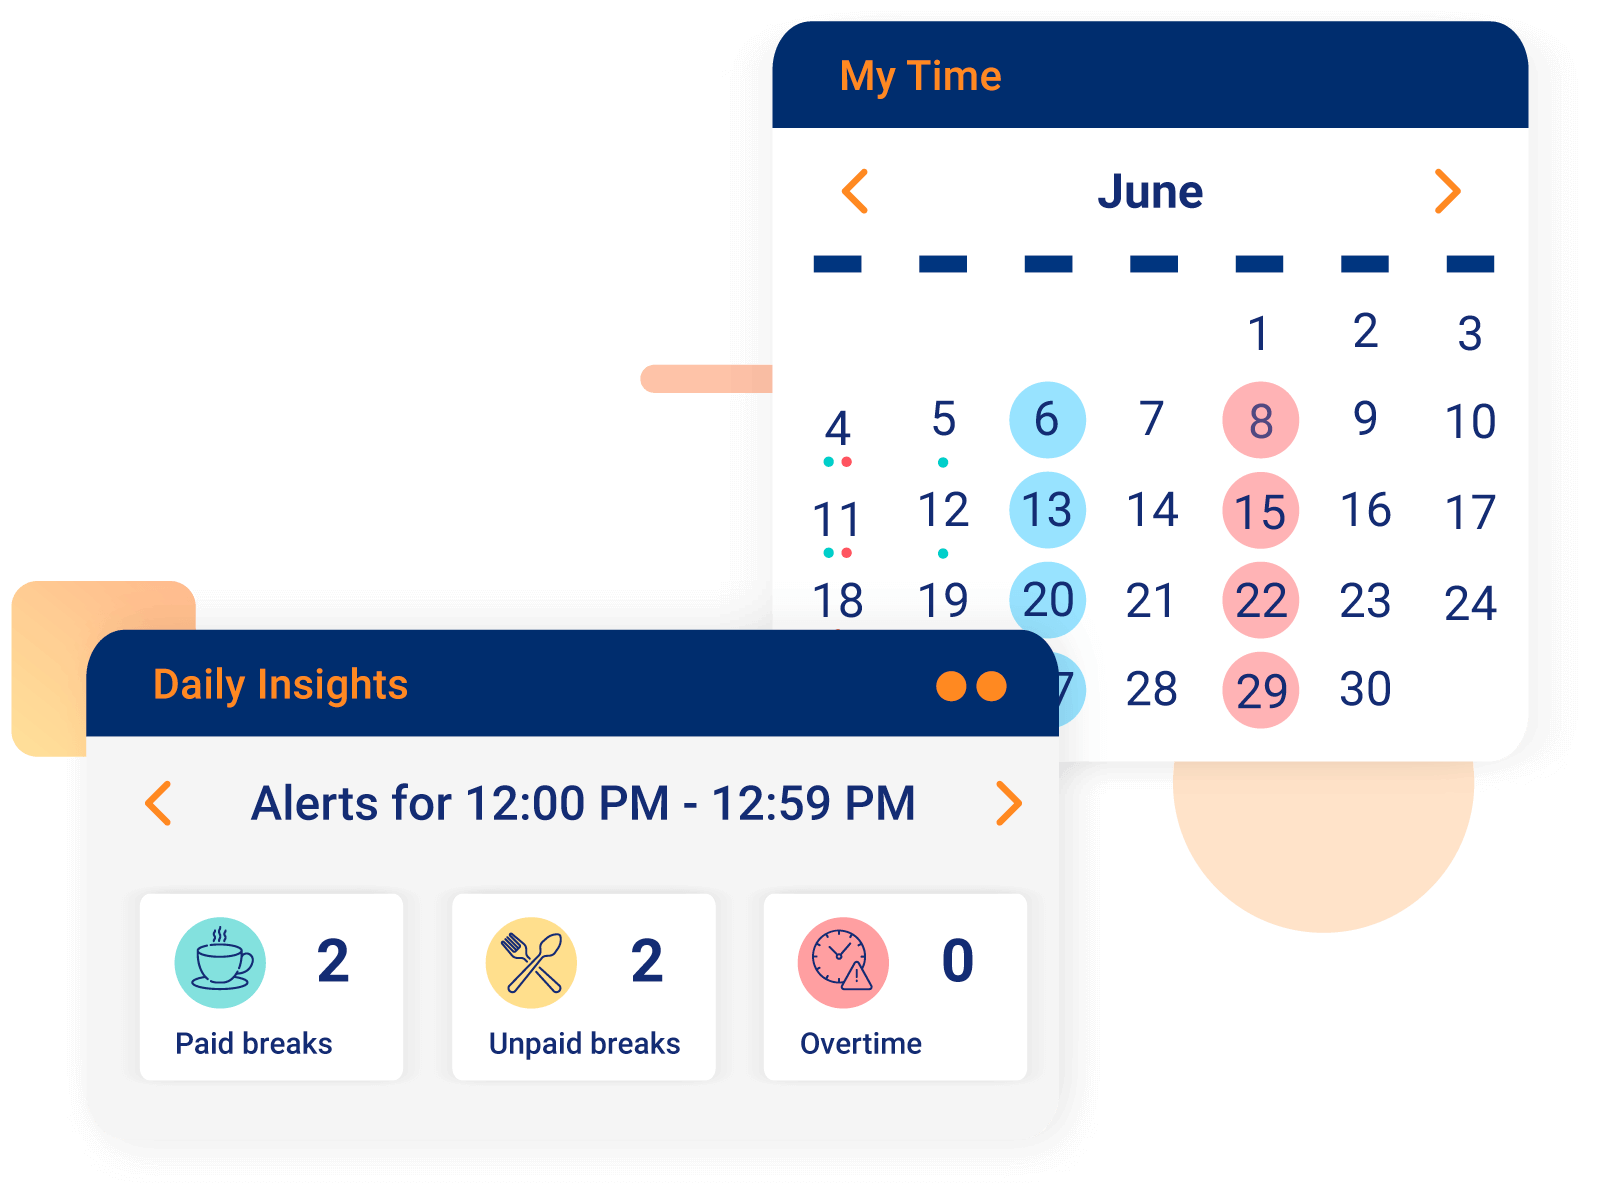 Restaurant labor and scheduling software employee calendar and daily insights